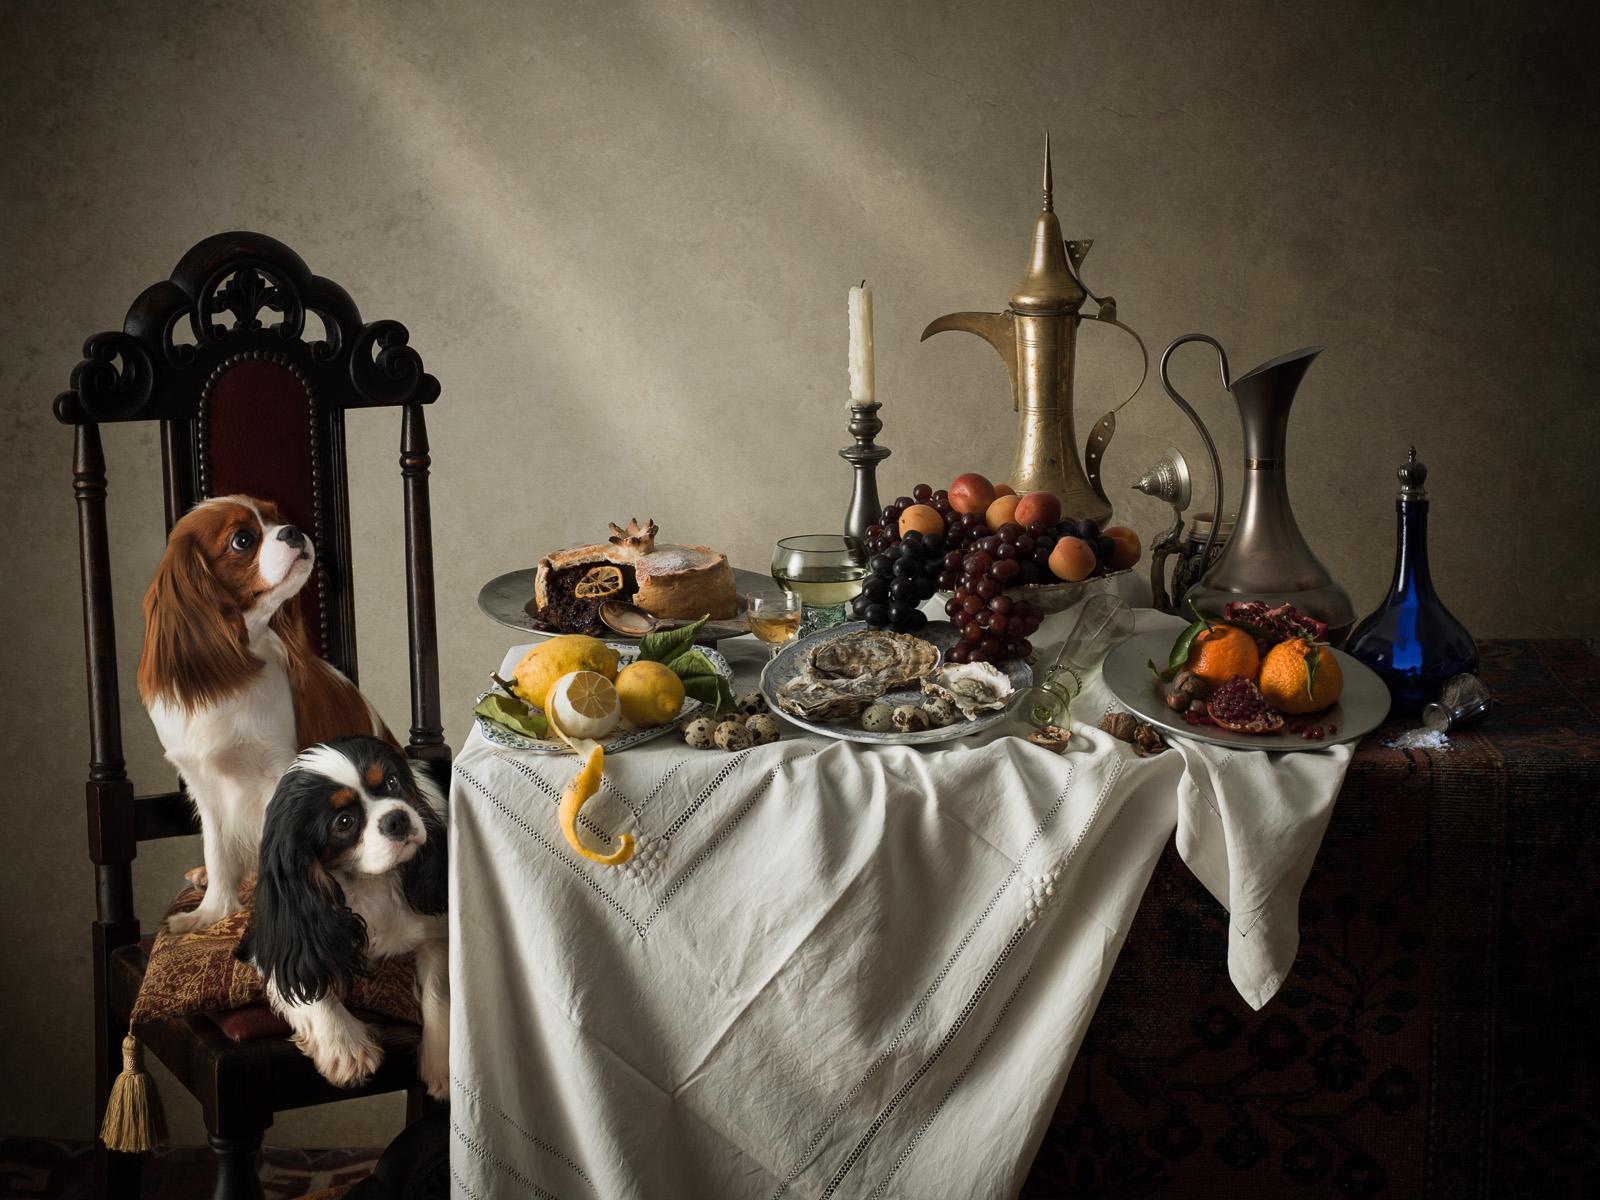 Tim Platt Color Photograph - Dutch dog #3 King Charles Spaniels - Animal signed limited edition contemporary